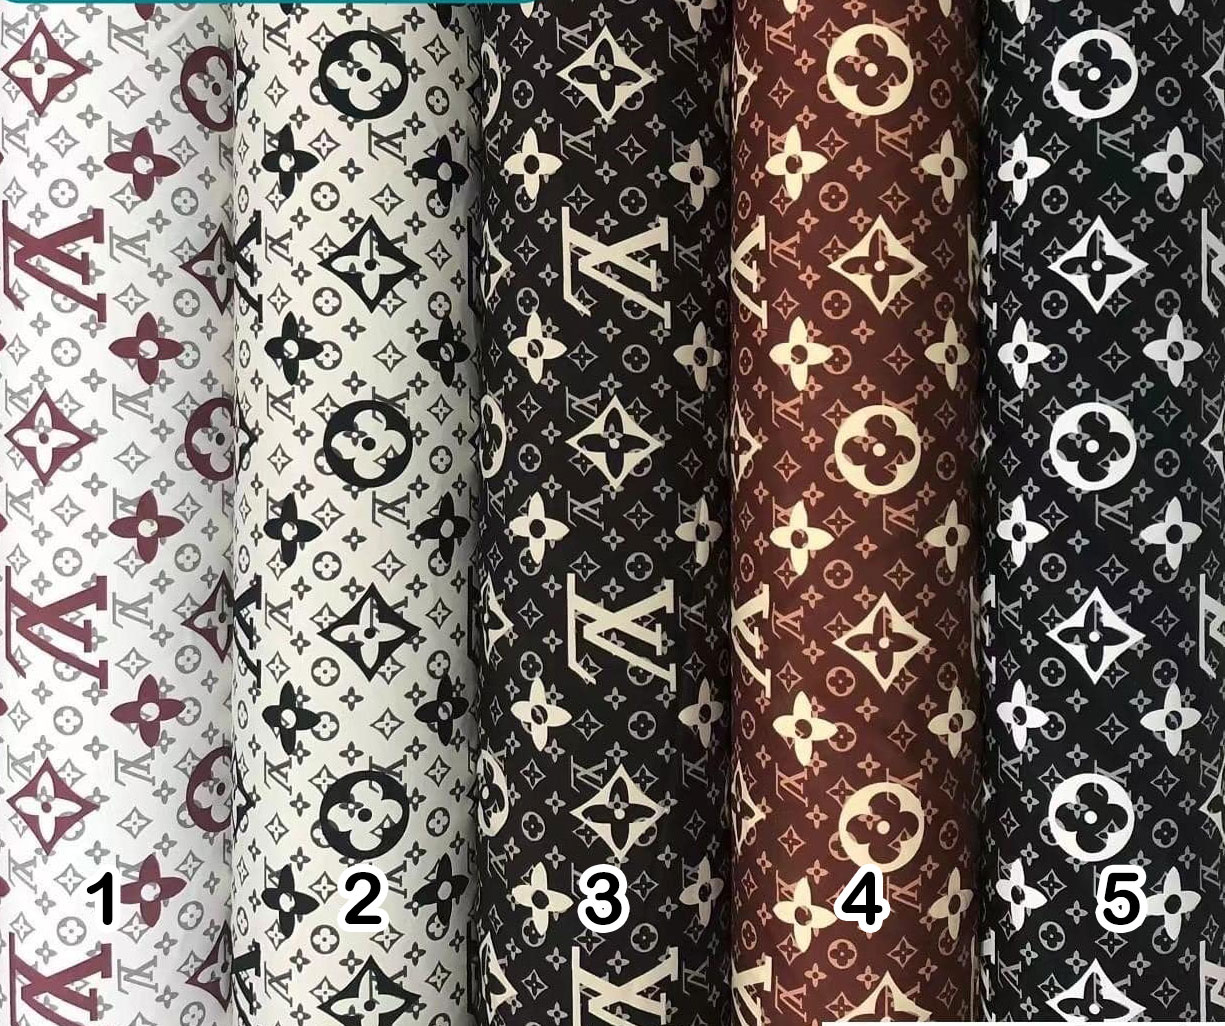 Chanel Polyester Fabric - FabrikAholic